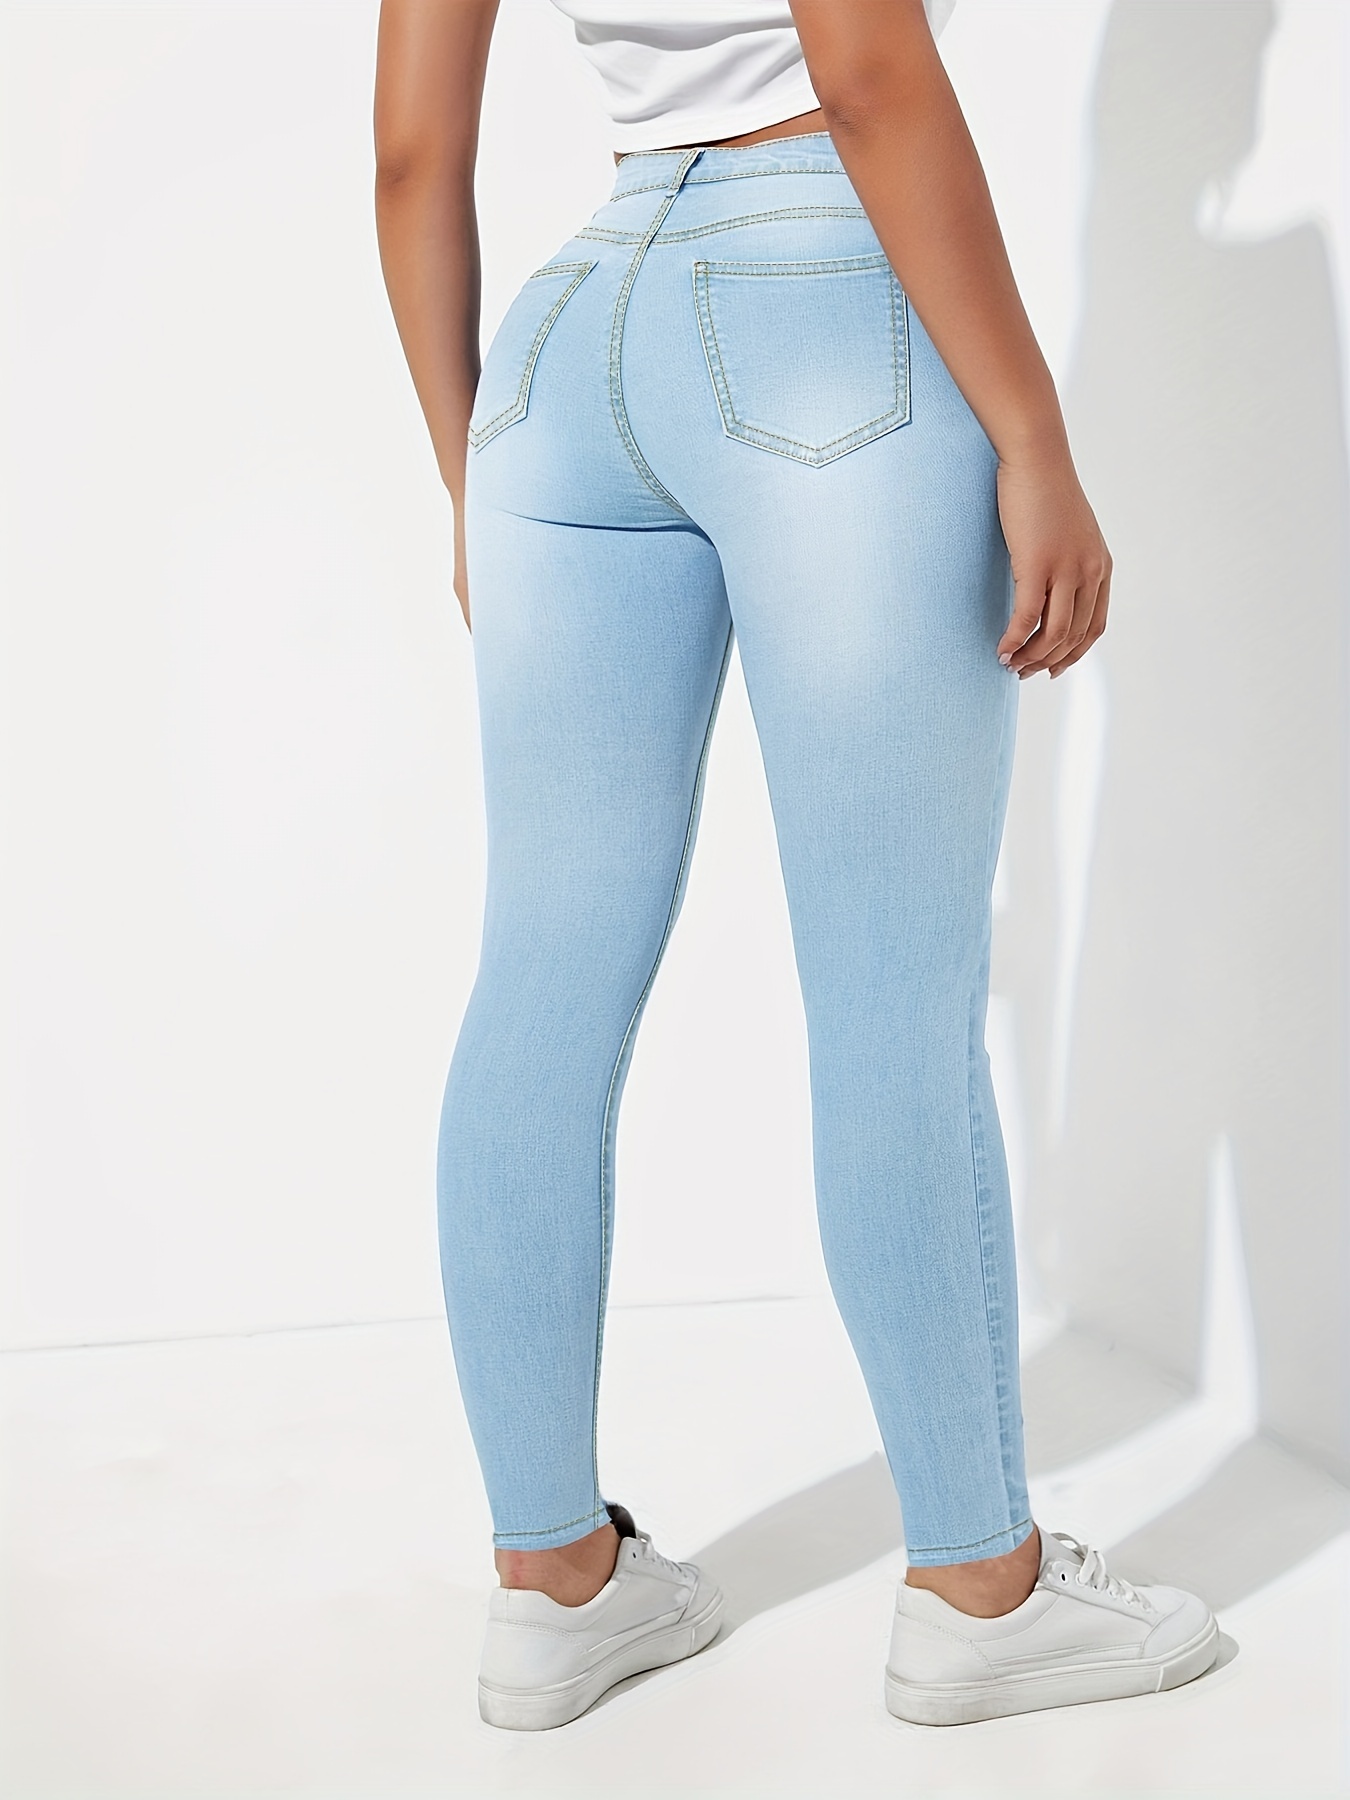 PacSun Perfect Blue Super High Waisted Jeggings